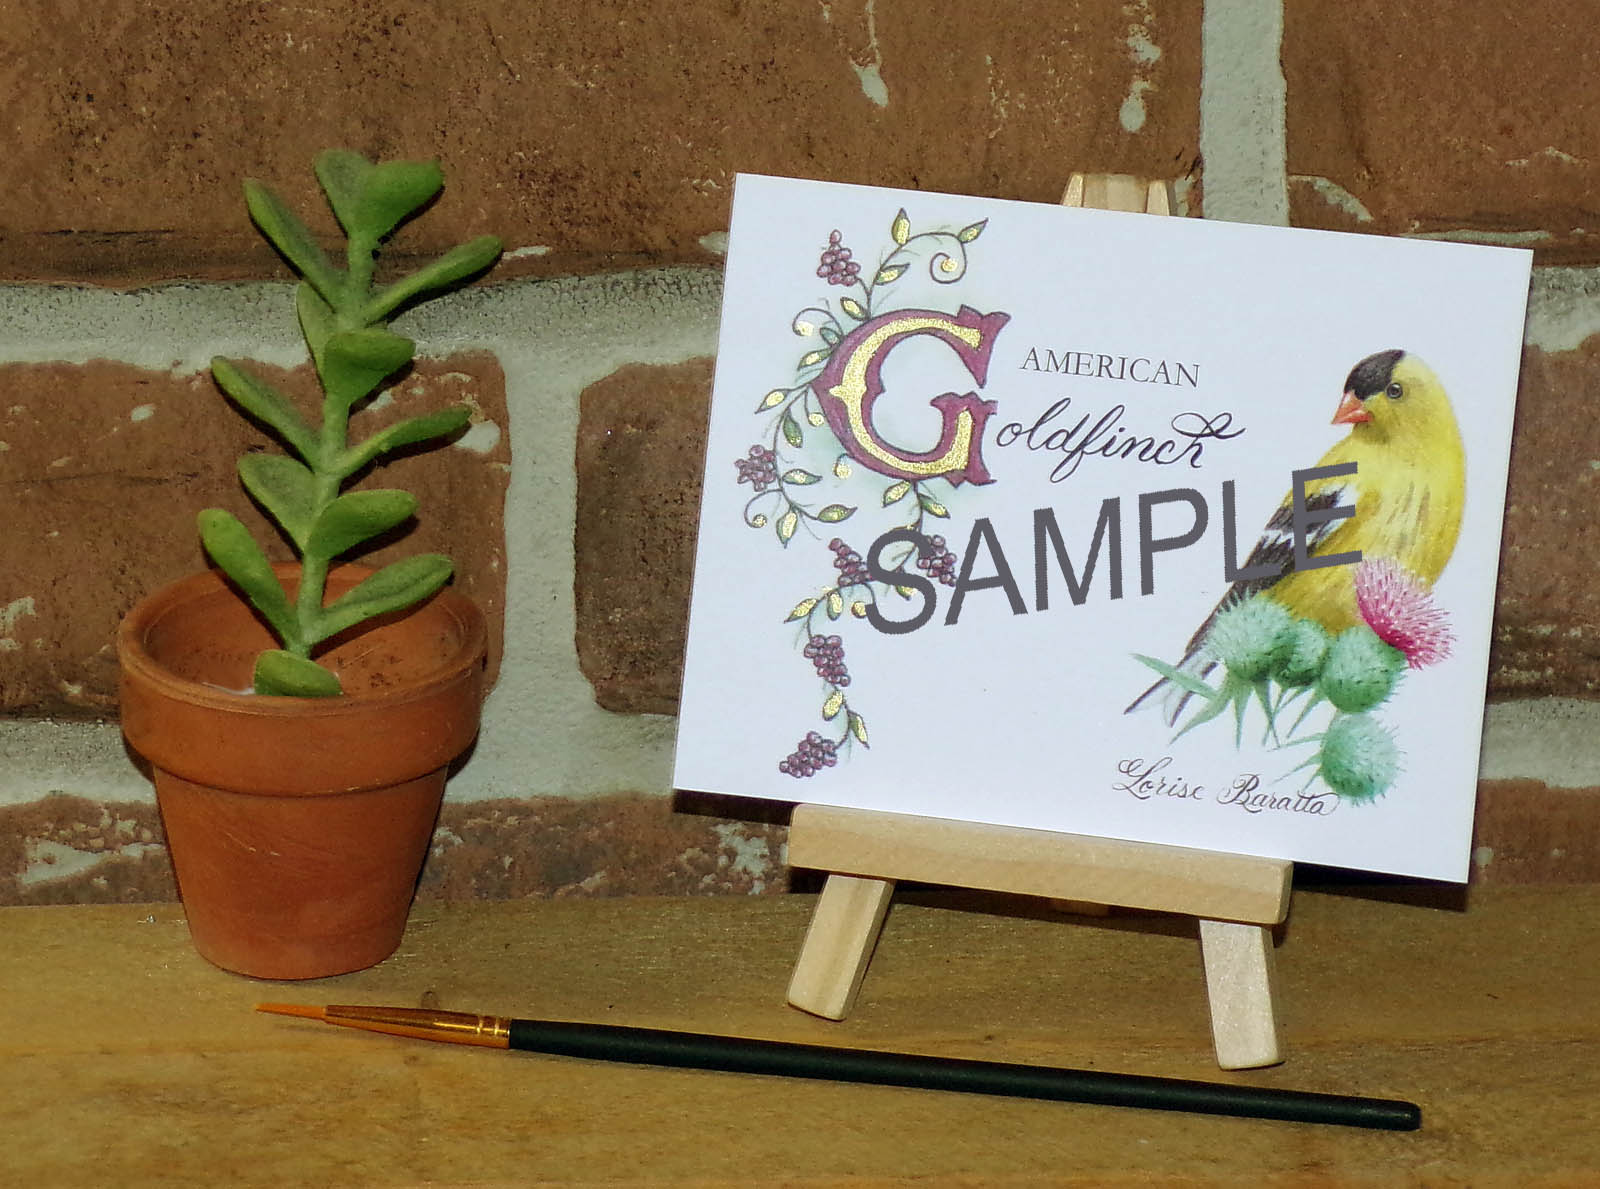 American Goldfinch Art Card with Illumination & Calligraphy